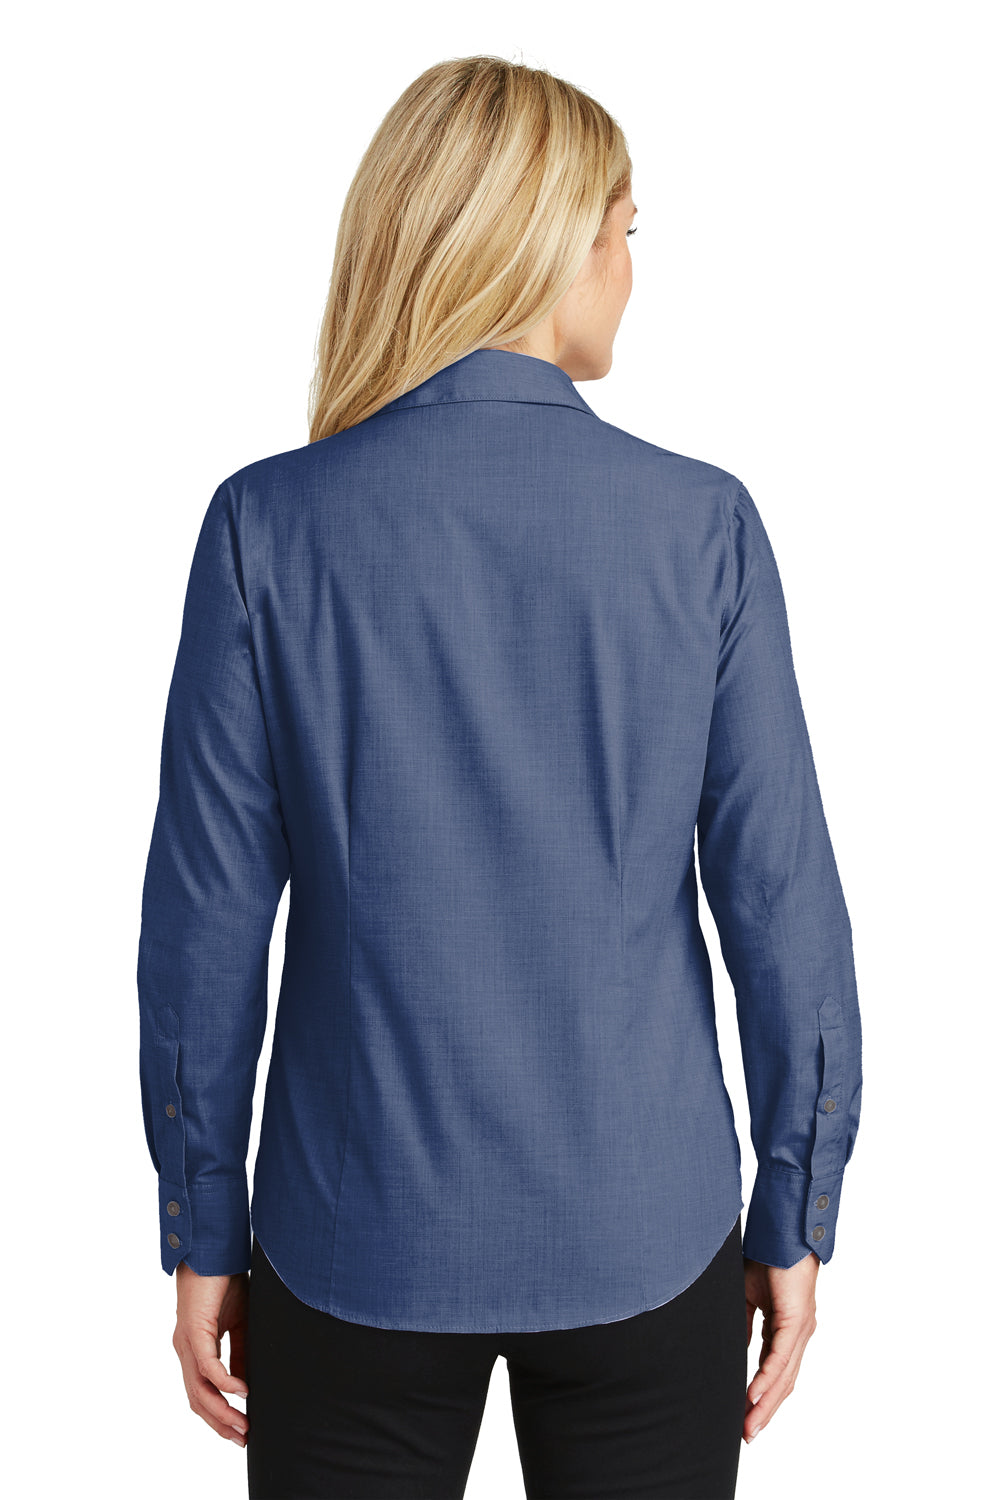 Port Authority L640 Womens Easy Care Wrinkle Resistant Long Sleeve Button Down Shirt Deep Blue Back